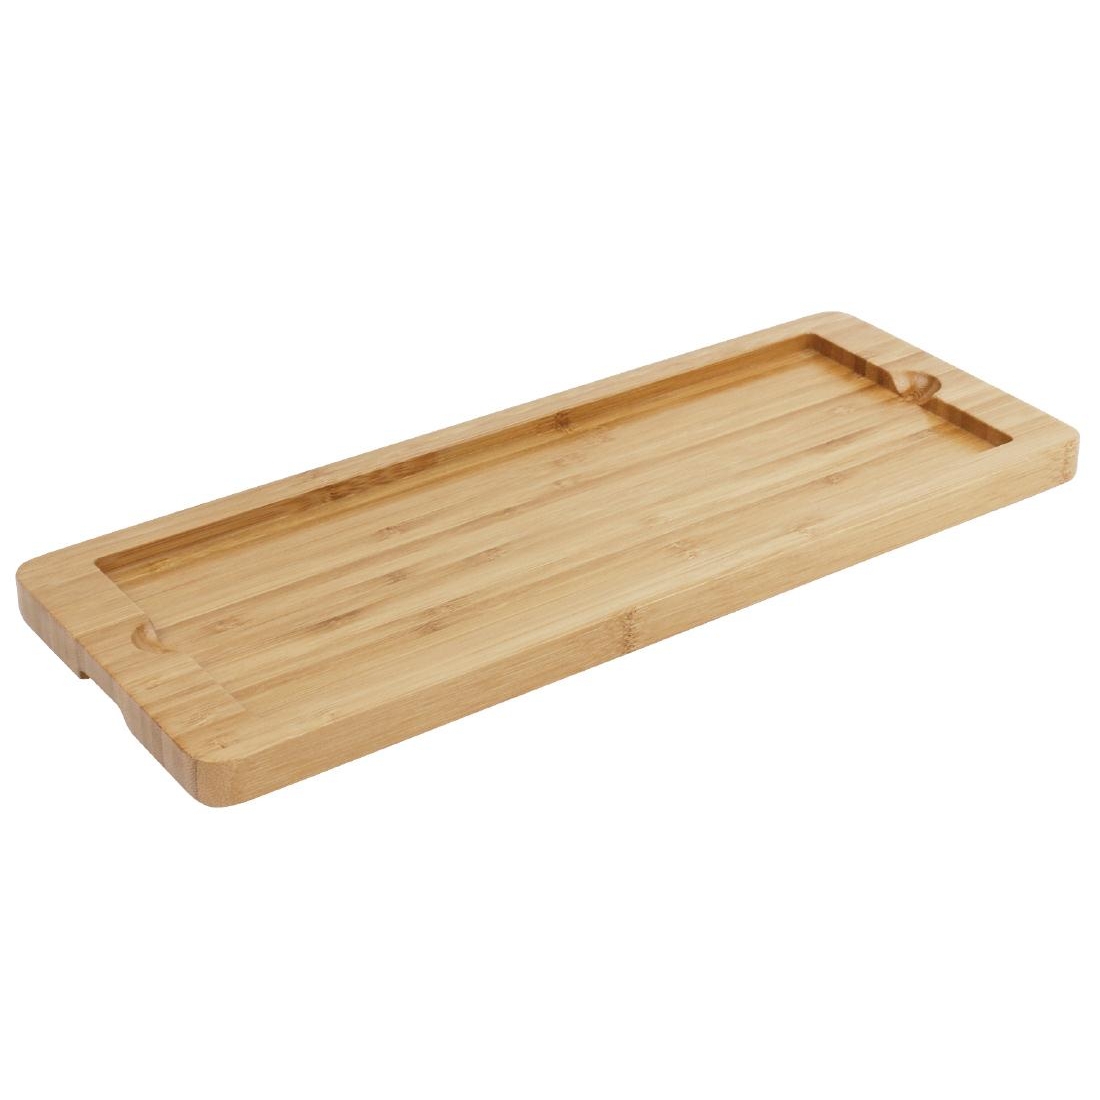 Olympia Wooden Base for Slate Platter 330 x 130mm